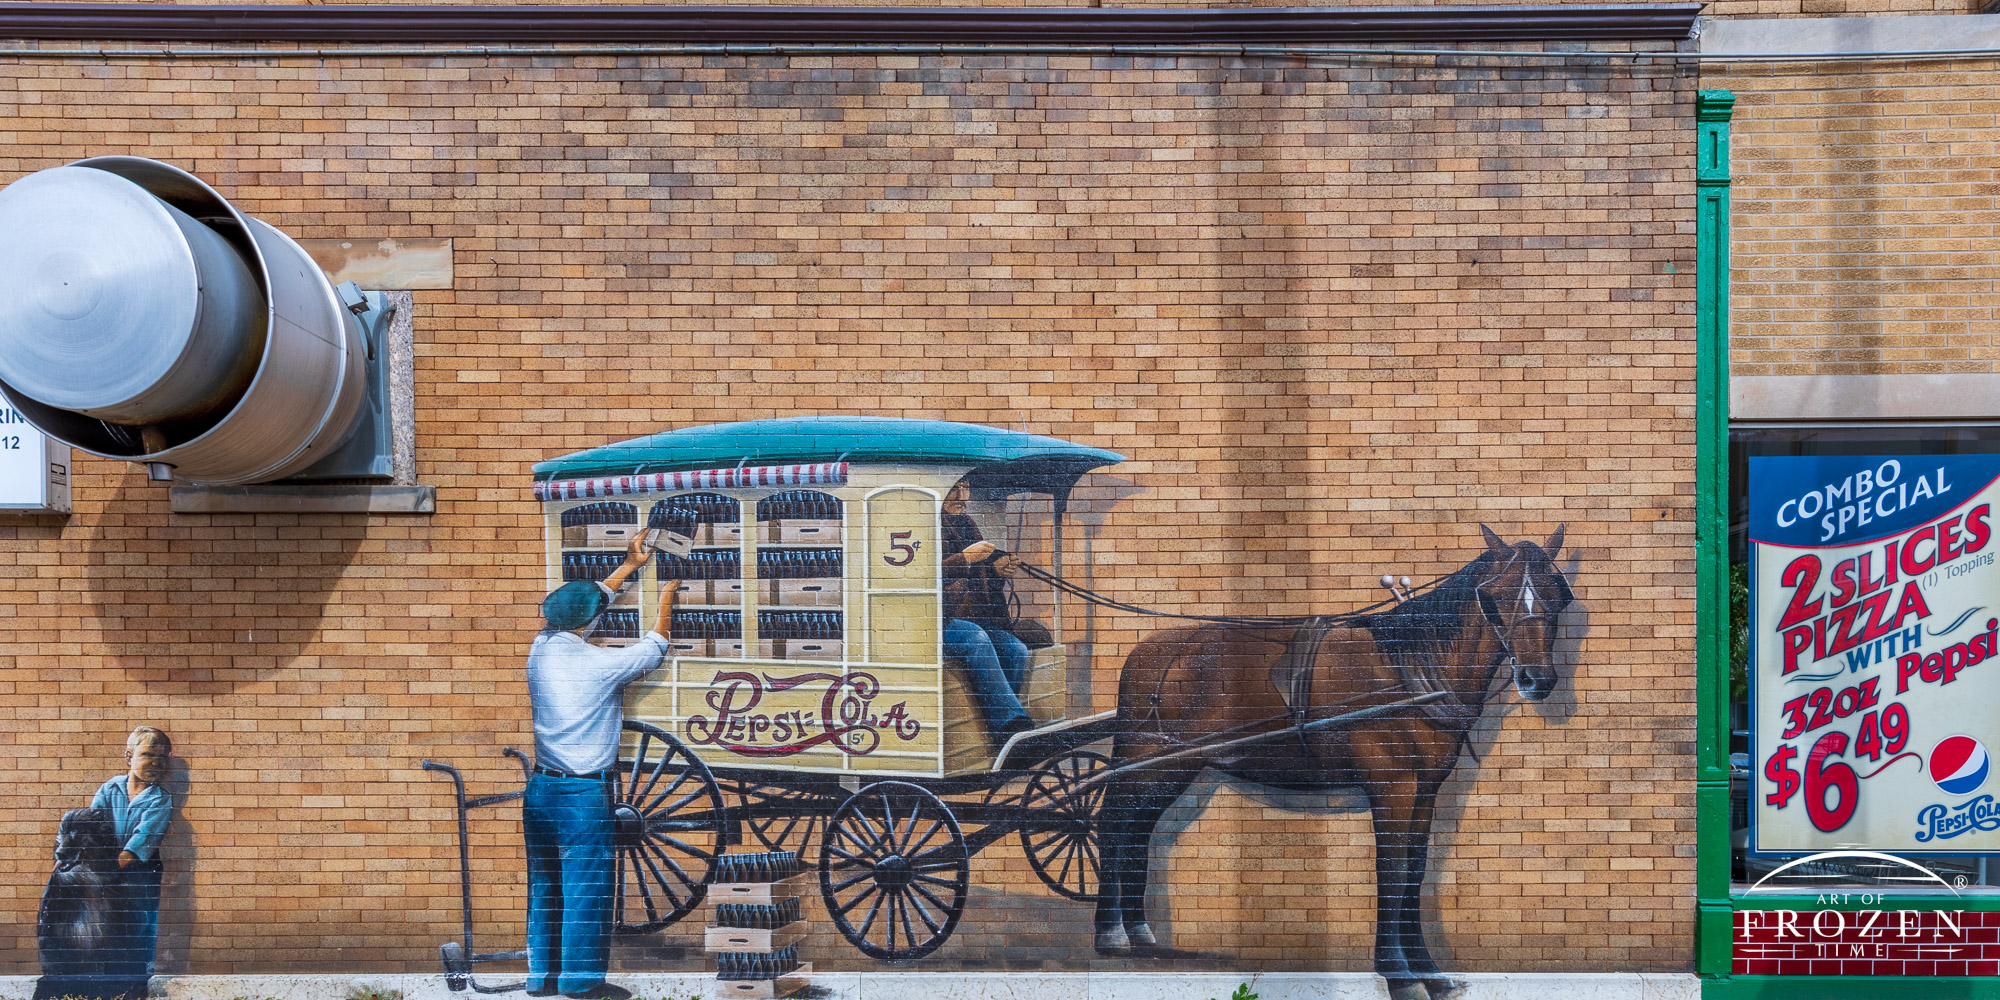 A mural of Pepsi salesman unloading his horse-drawn delivery wagon of bottle Pepsi